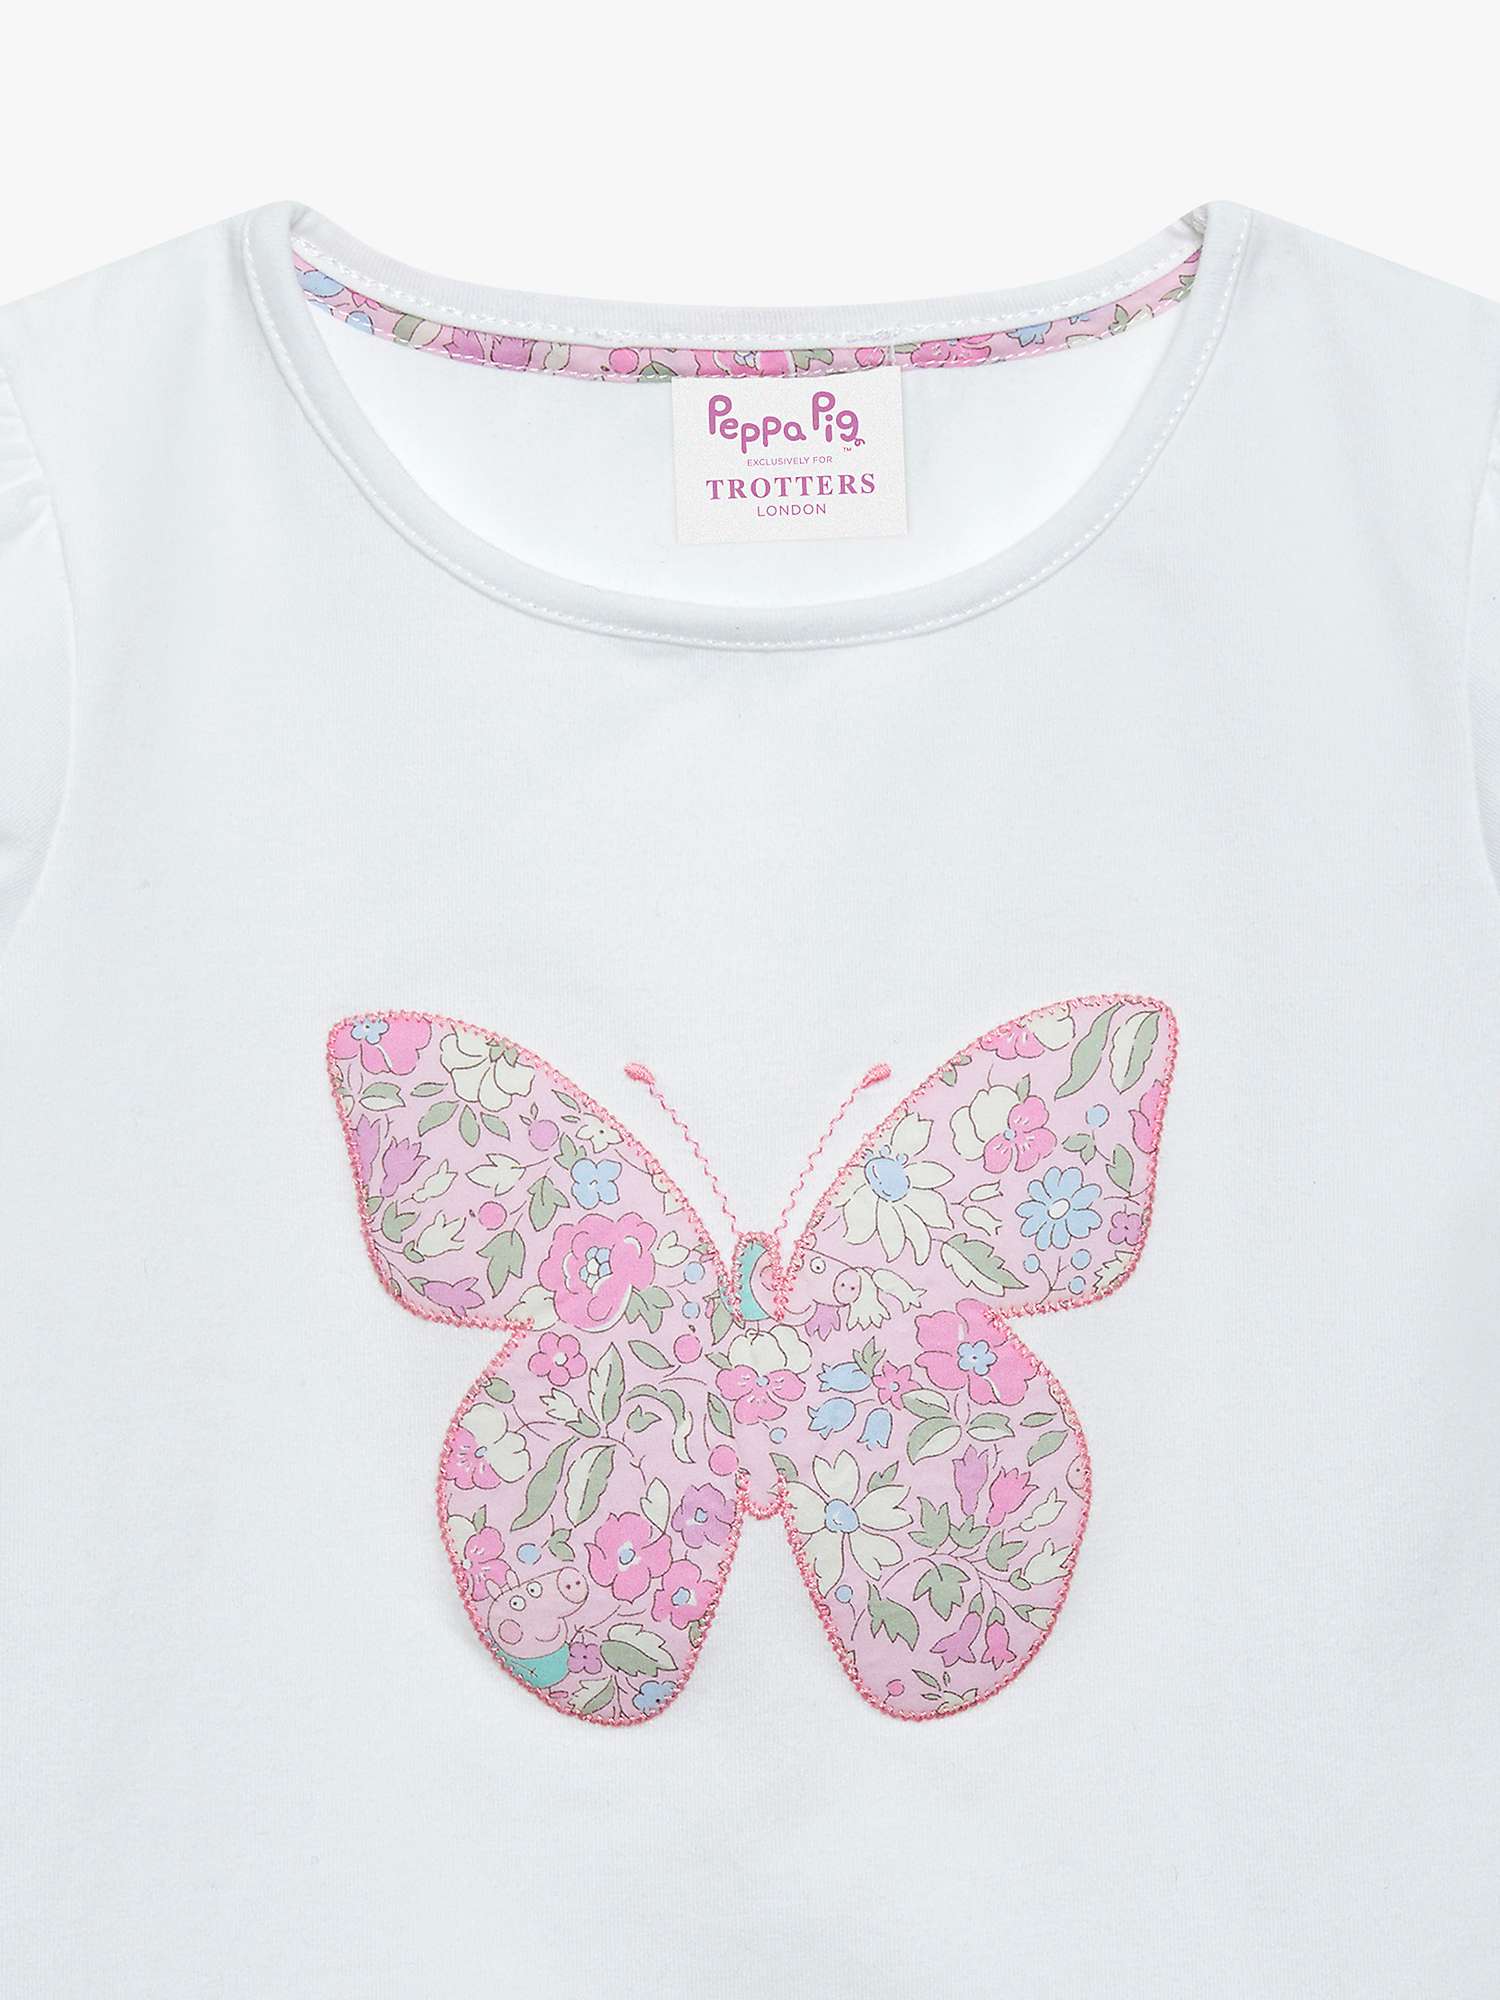 Buy Trotters Kids' Peppa Pig Meadow Liberty Print Butterfly Jersey Top, White/Pink Online at johnlewis.com